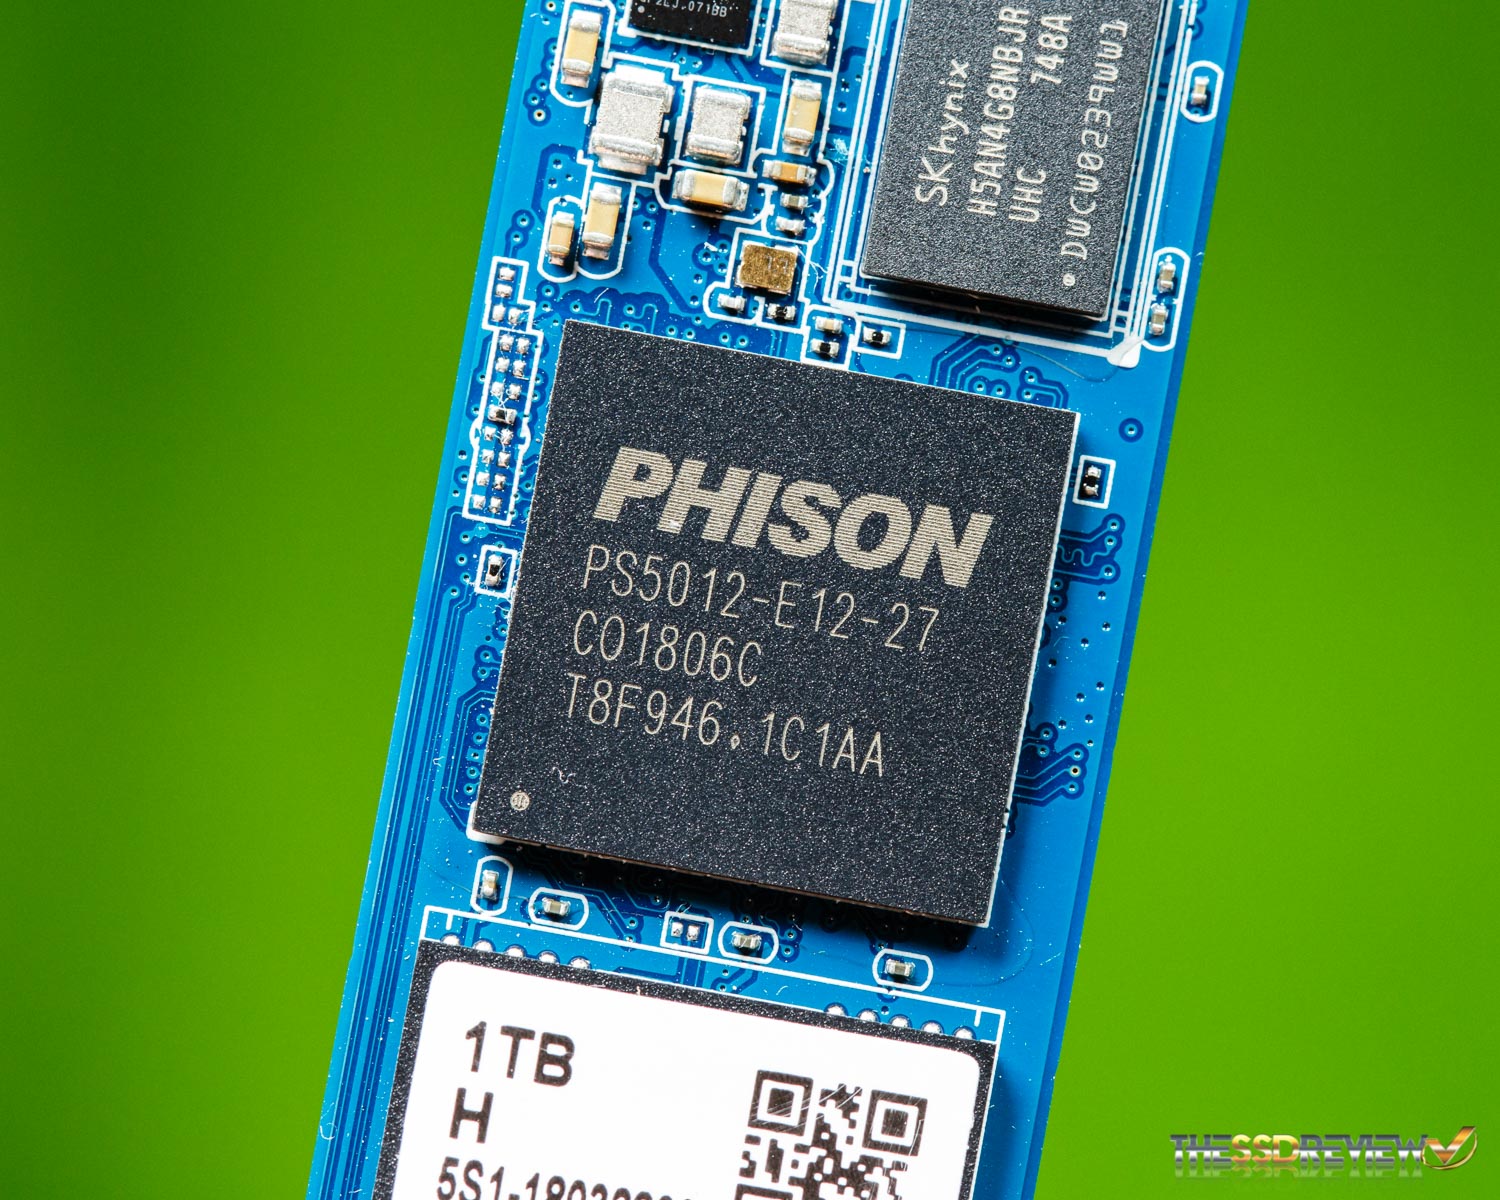 Phison E12 NVMe PCIe 3.0 x4 Controller Preview: Phison Turns